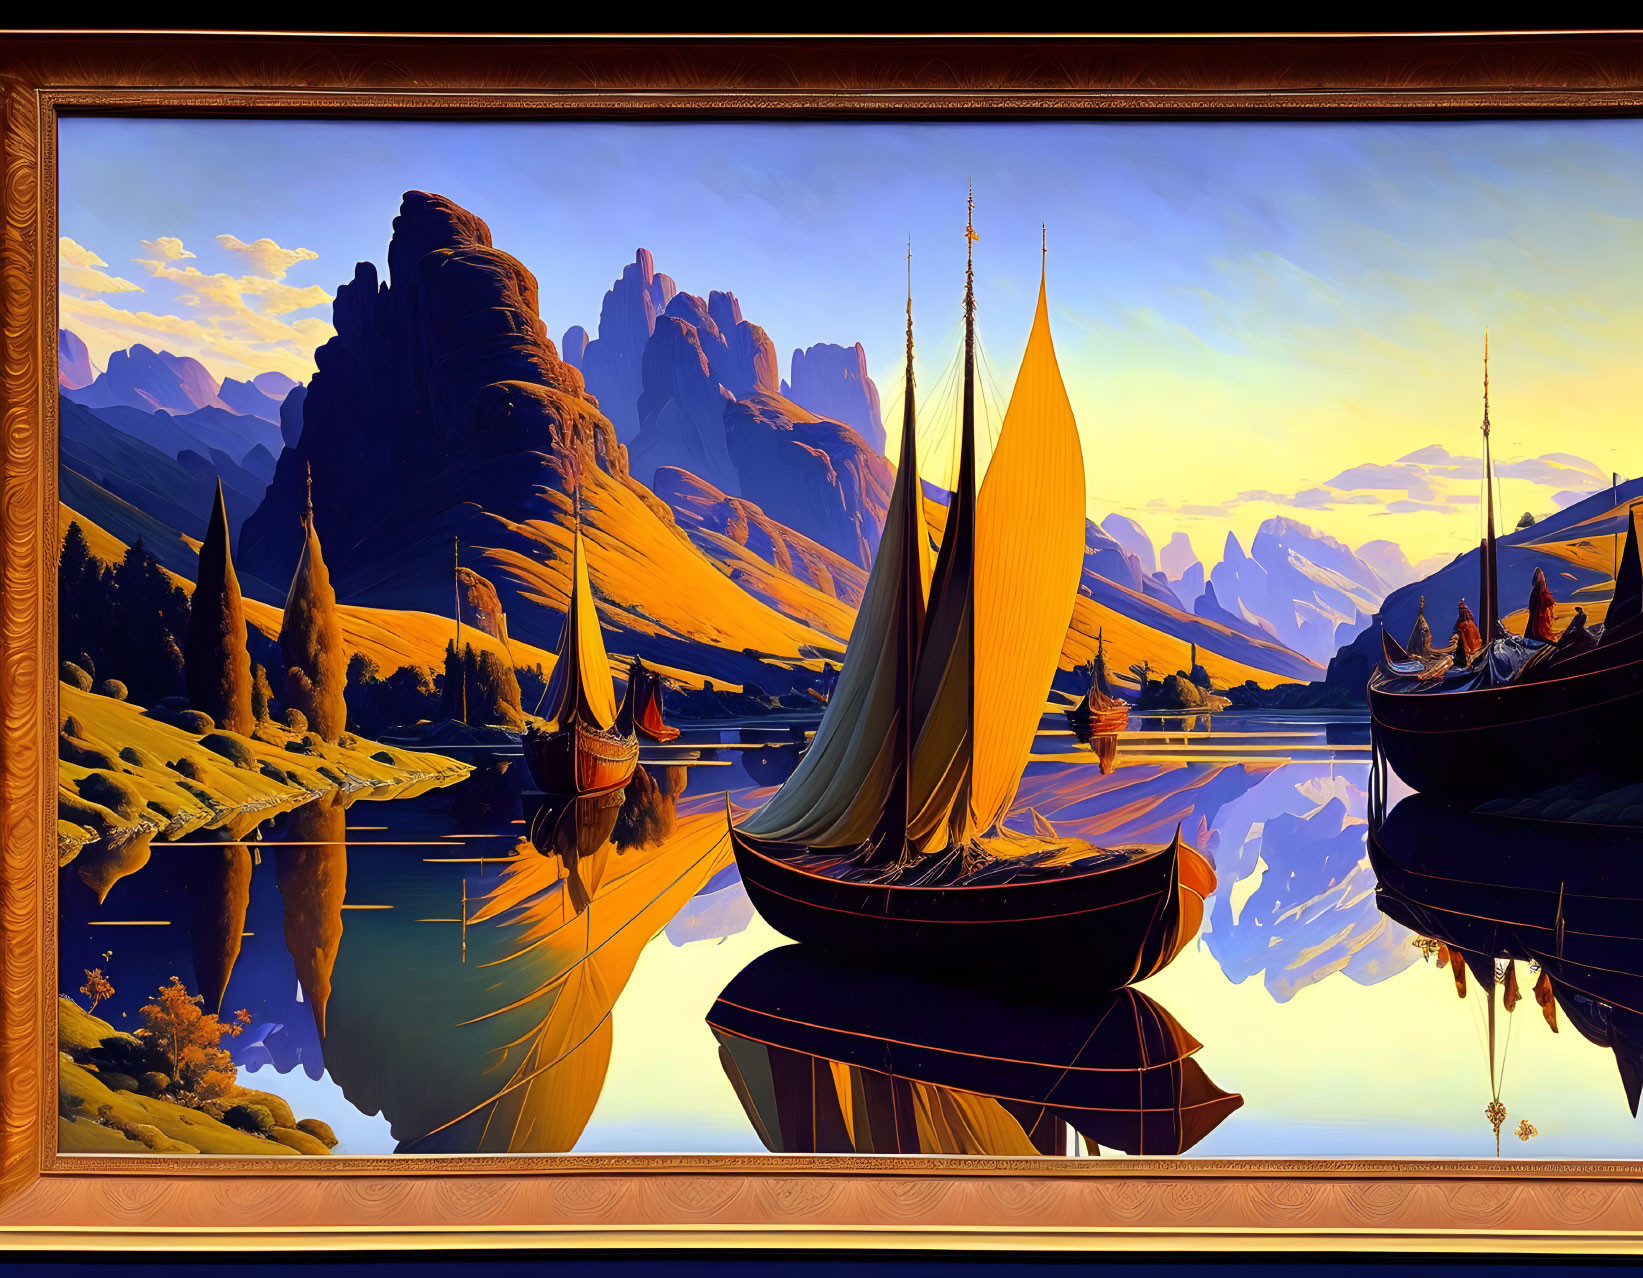 Digital painting of sailboats on tranquil lake with mountains in ornate frame